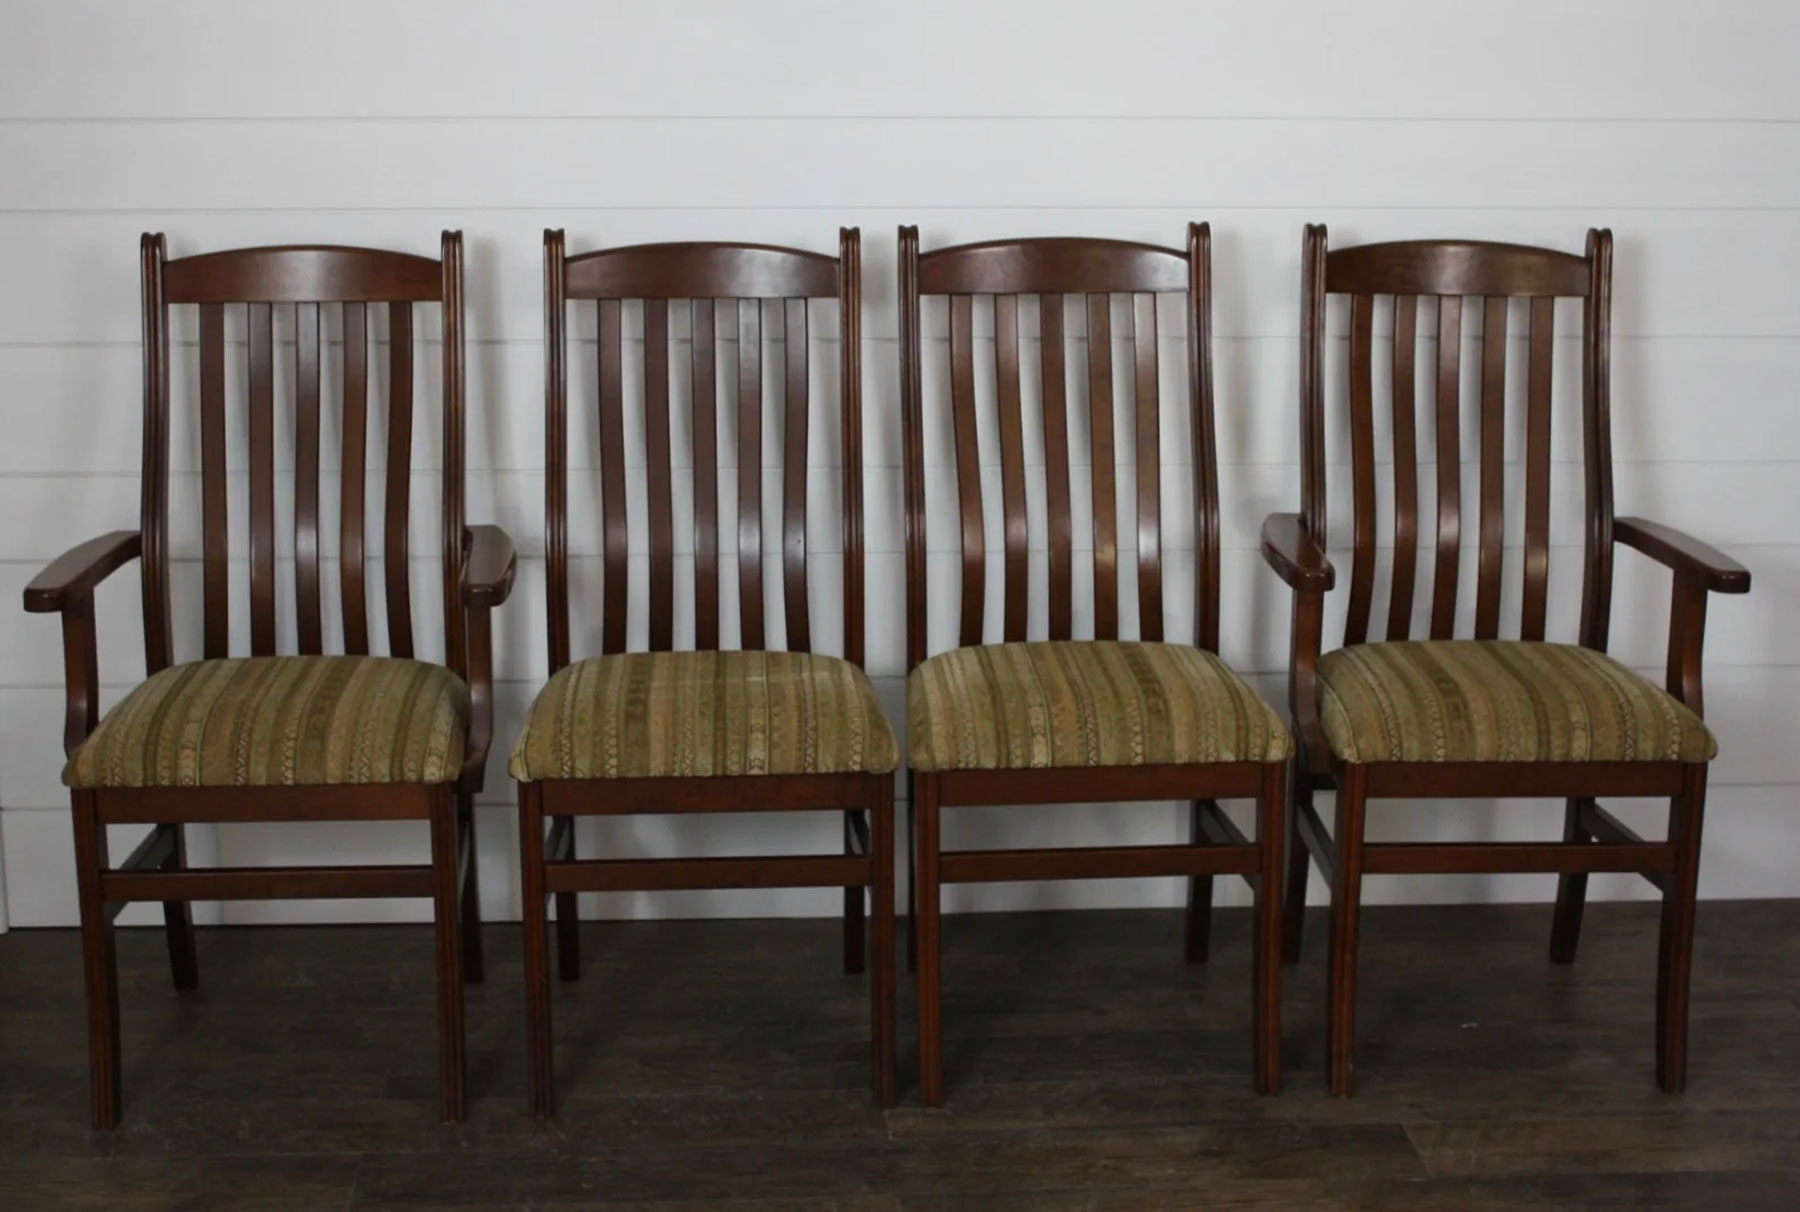 (4) Williamson Upholstered Dining Chairs in Cherry